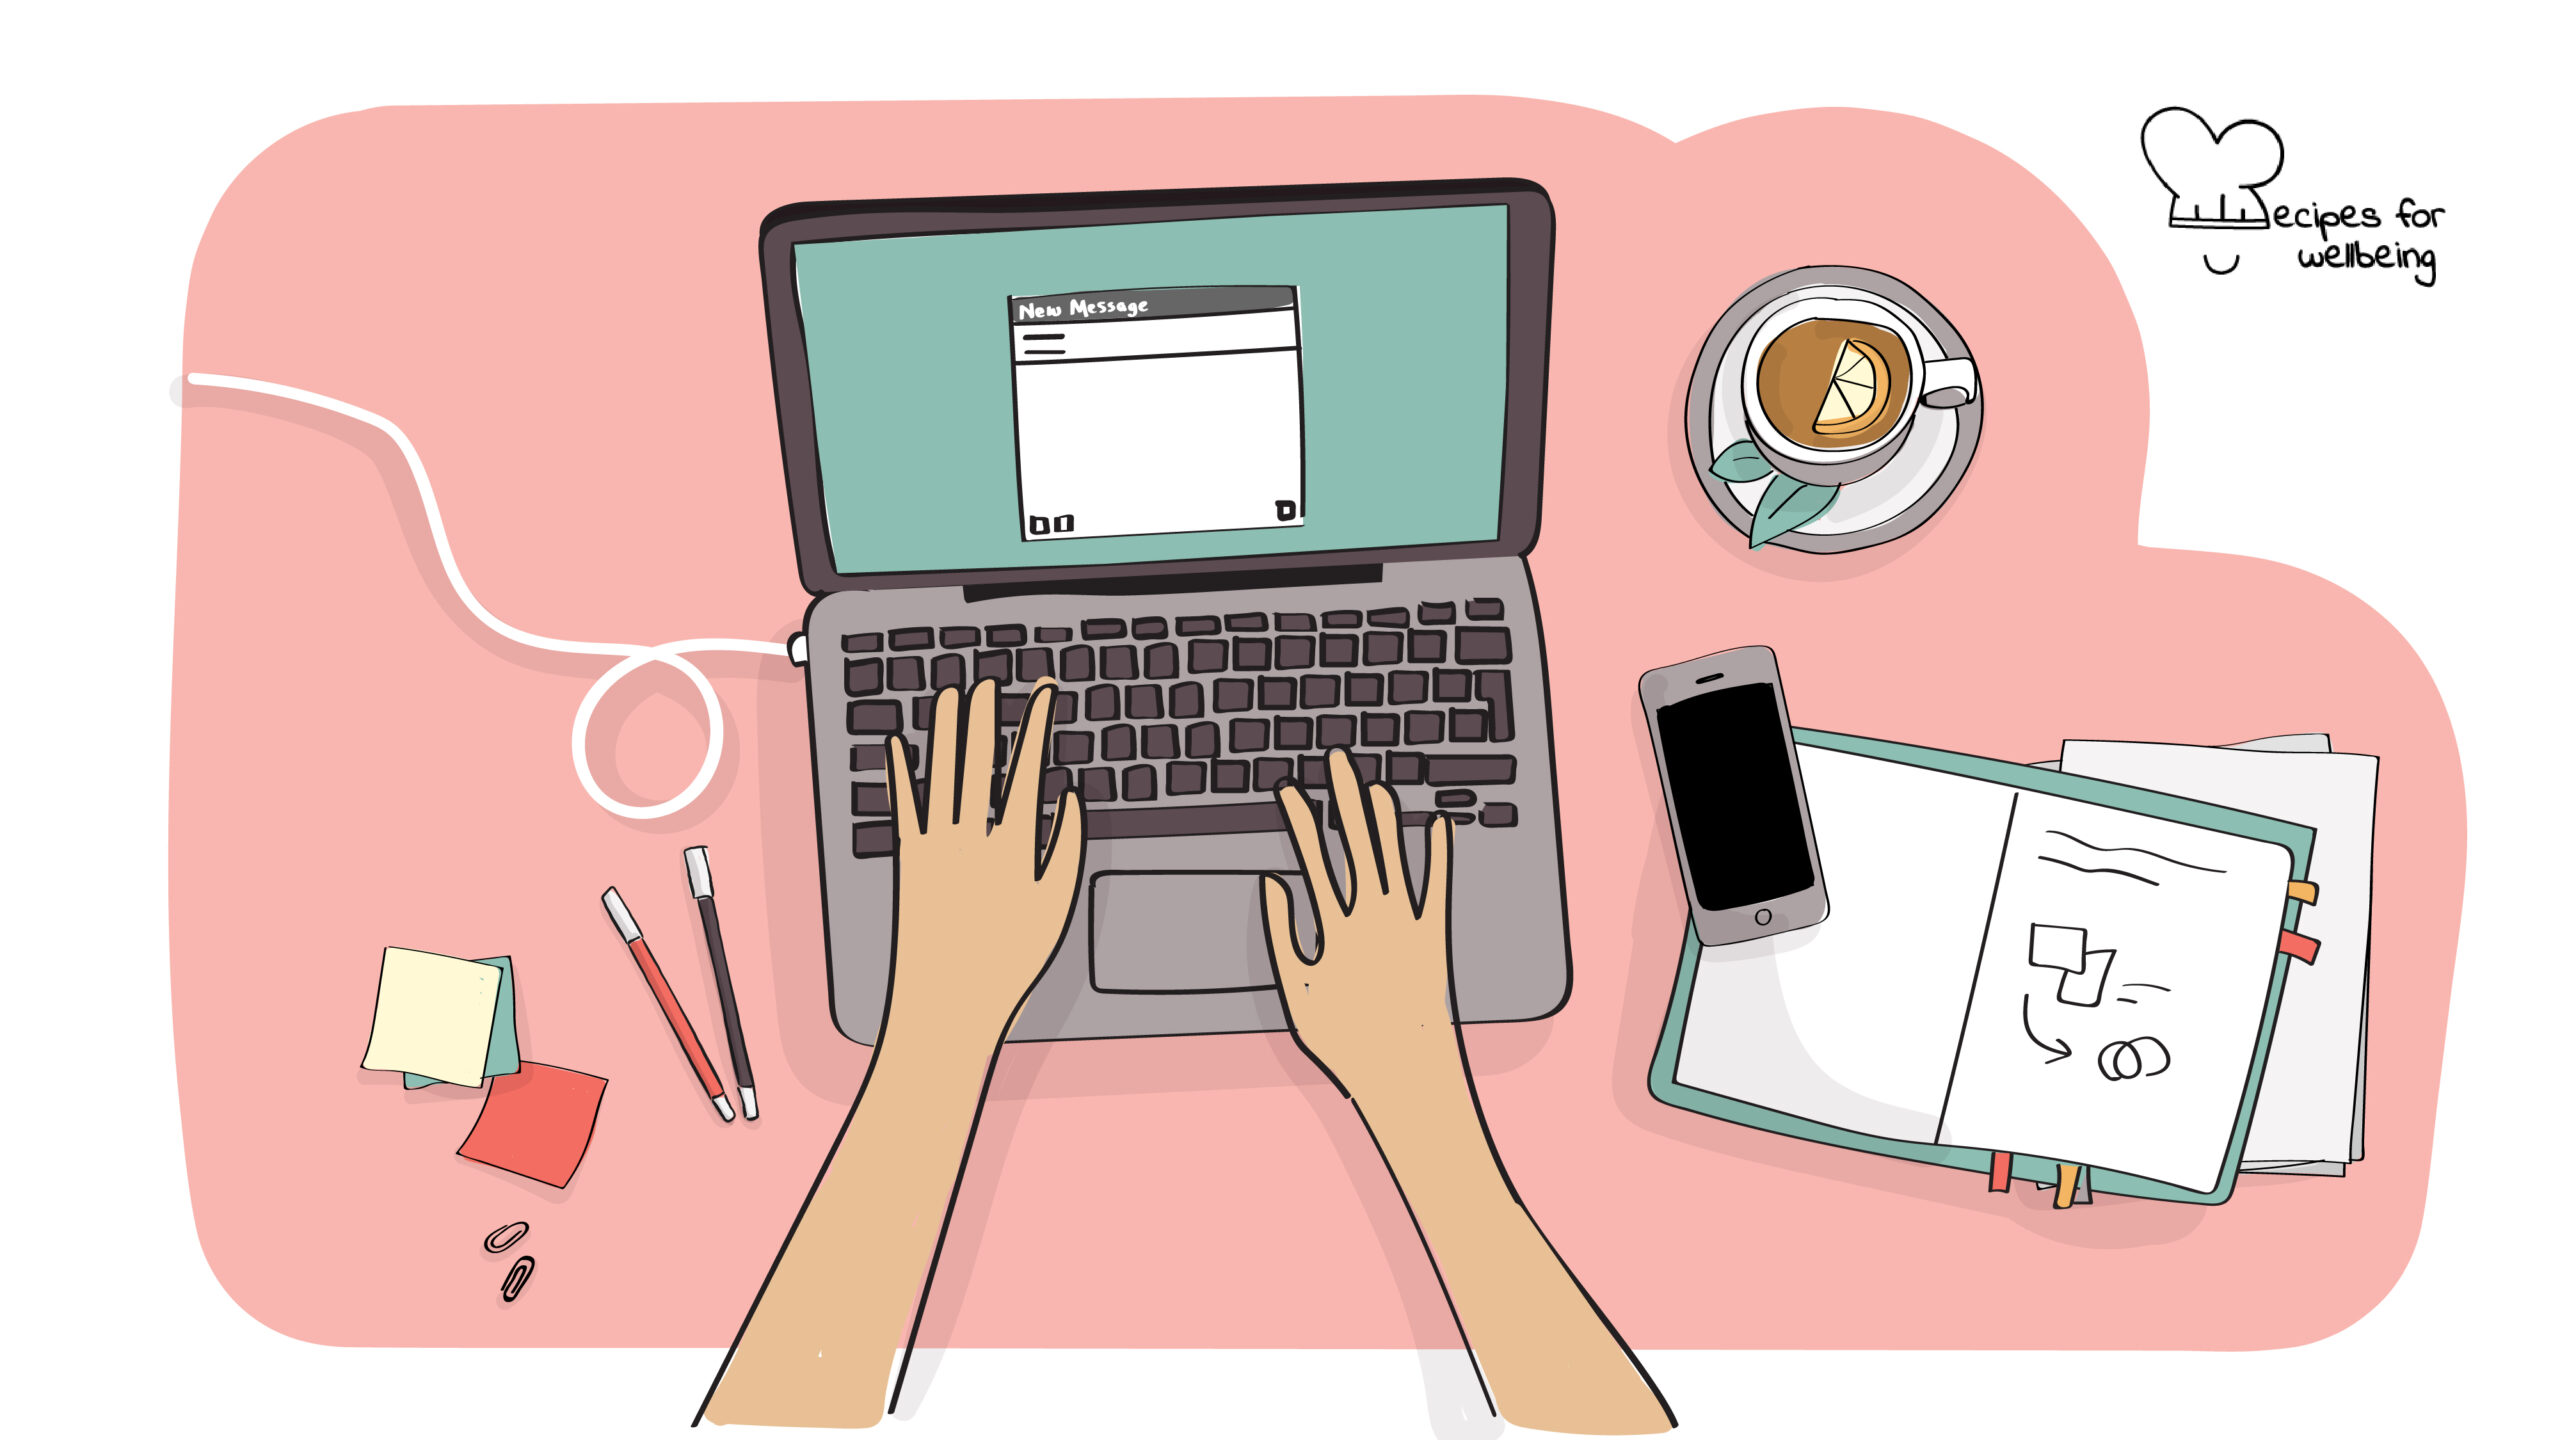 Illustration of a pair of hands typing an email on a laptop. © Recipes for Wellbeing